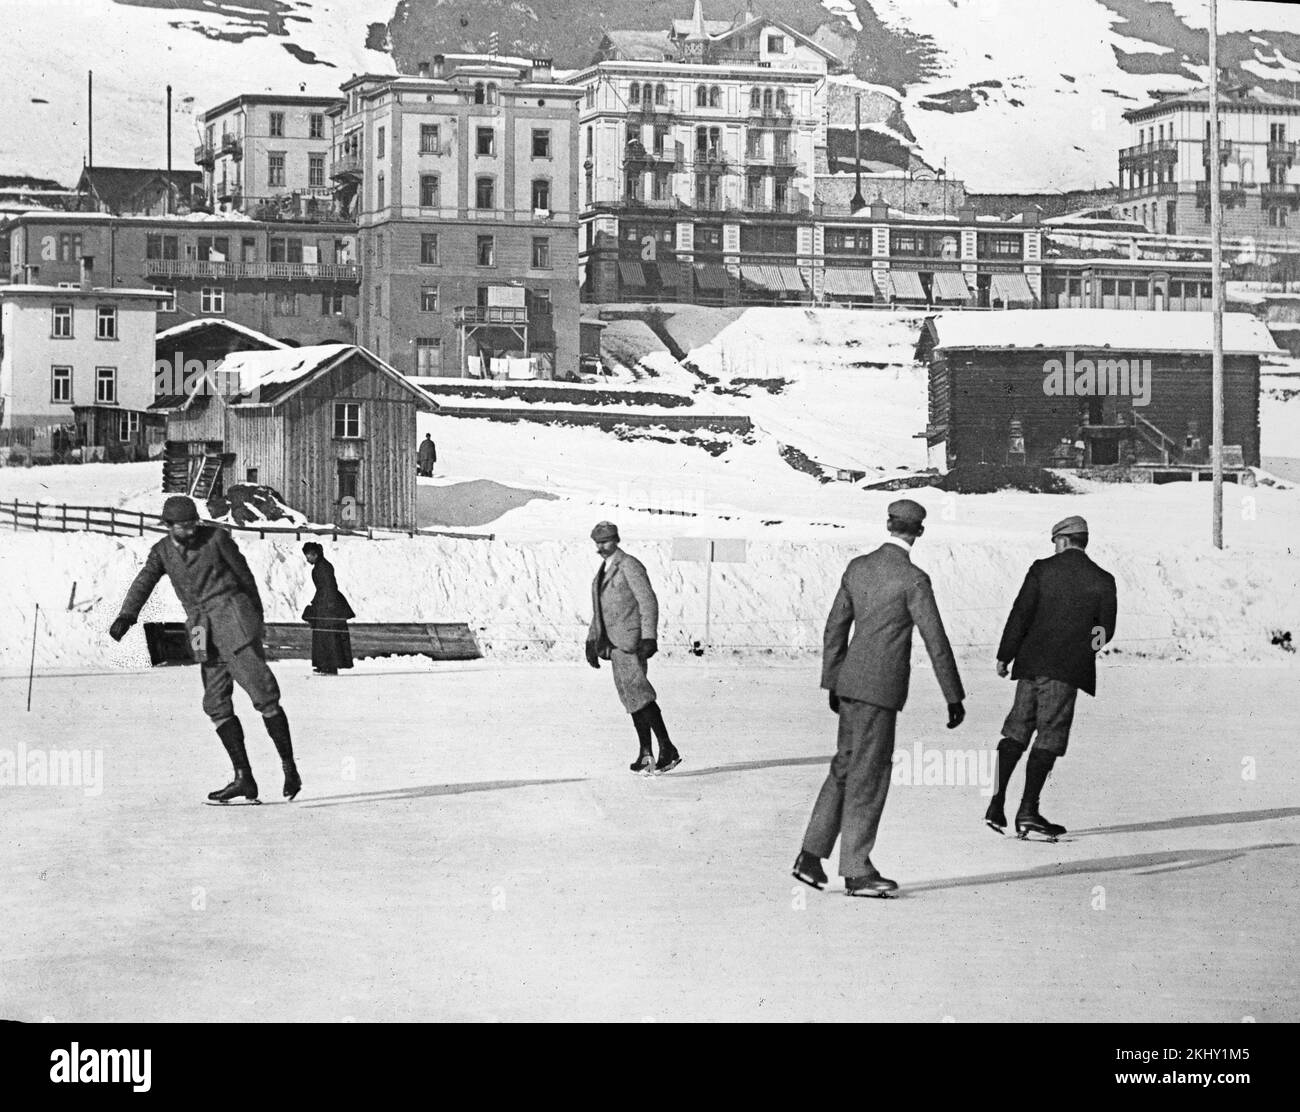 An early 20th century black and white photograph showing a group of men skating on ice in the town of St. Moritz in the Swiss Alps. Stock Photo